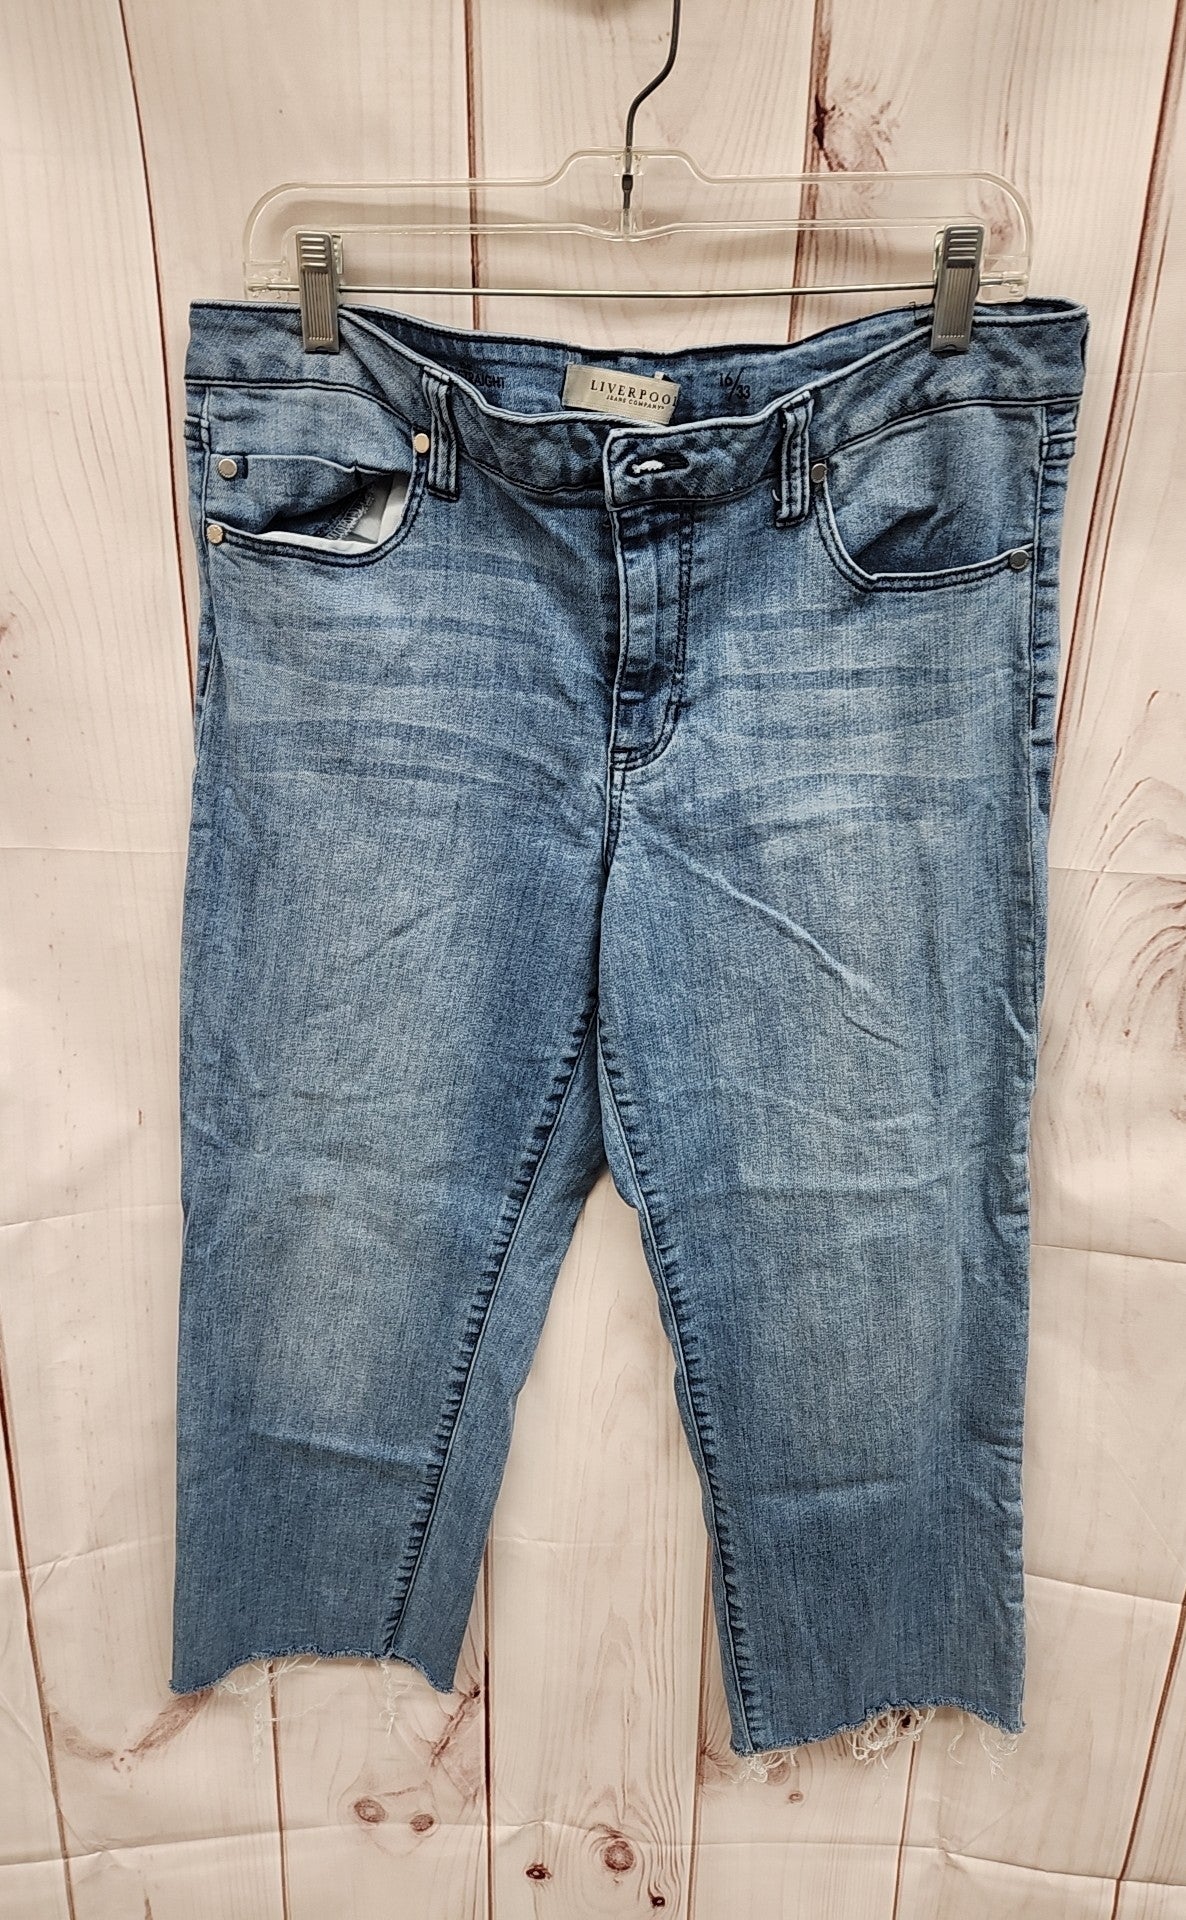 Liverpool Women's Size 33 (15-16) The Crop Straight Blue Jeans